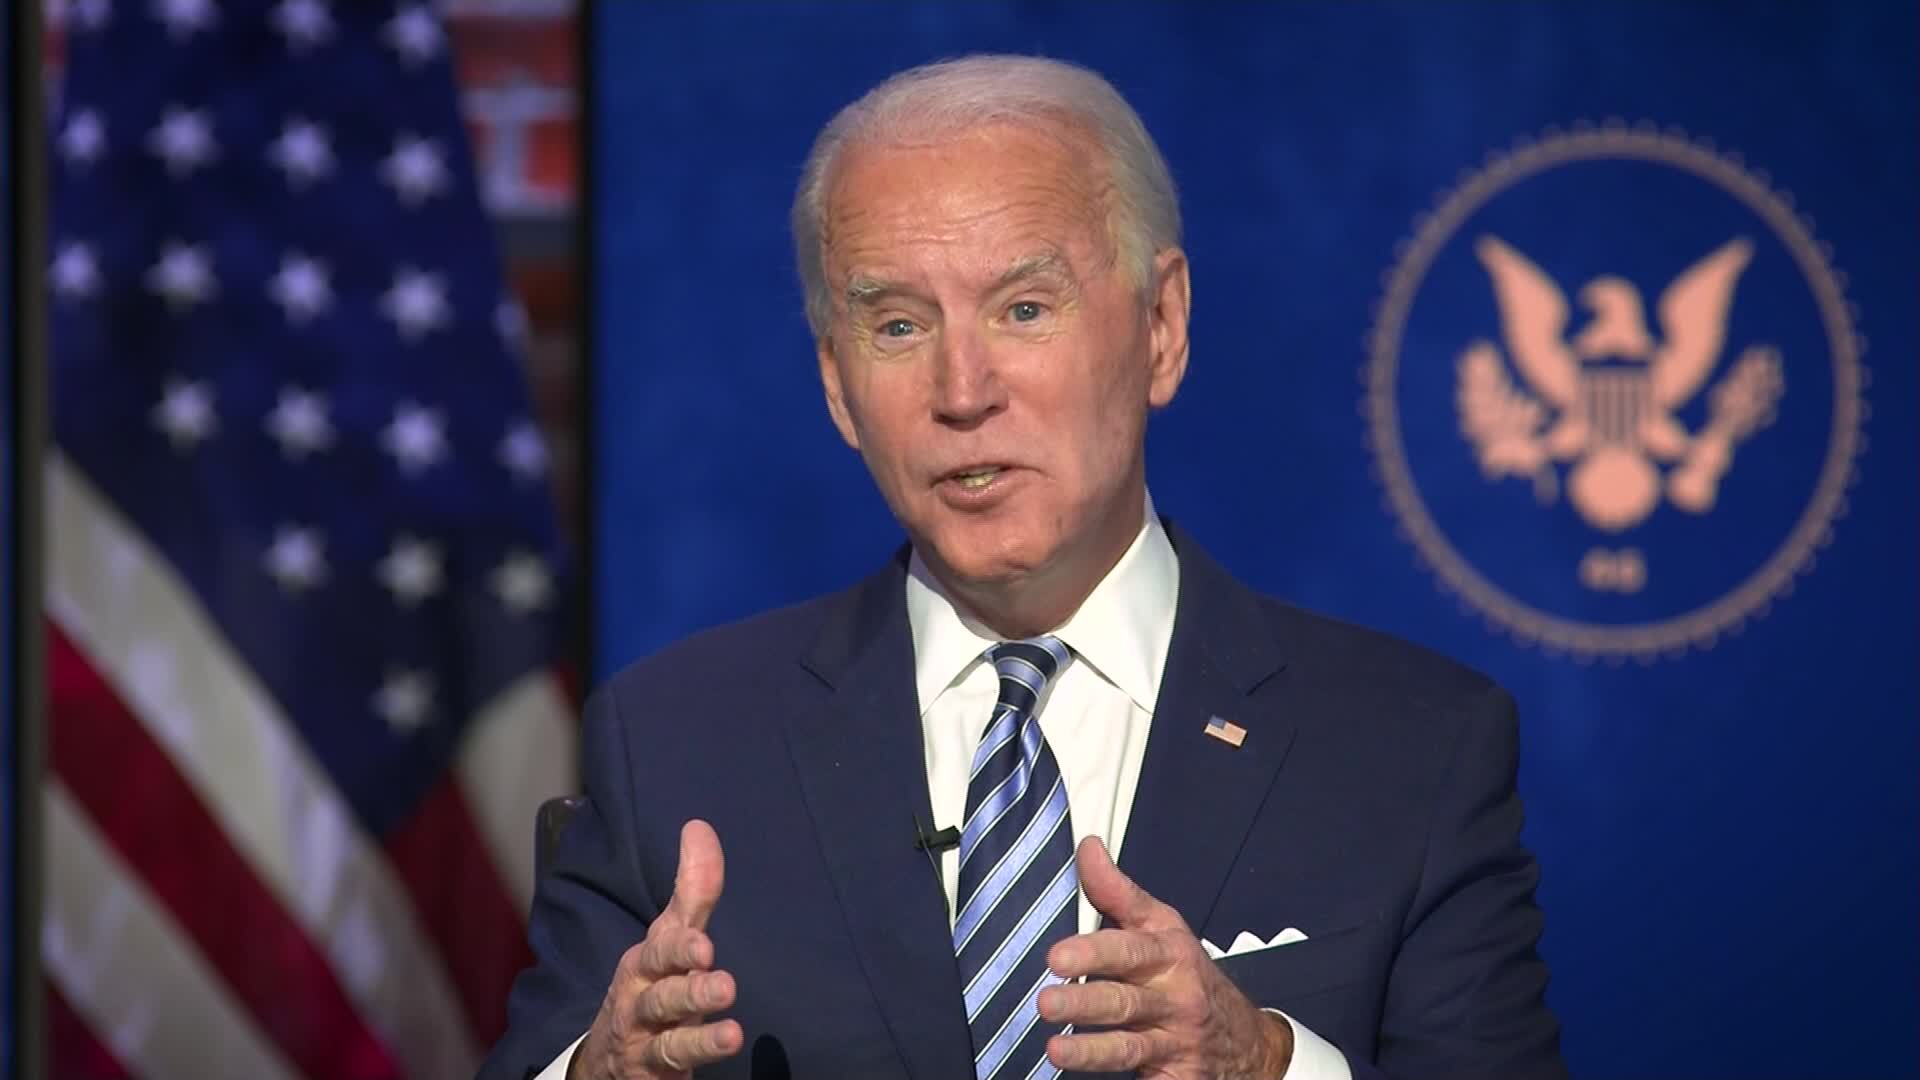 Biden and Harris sit down for first joint interview since winning the